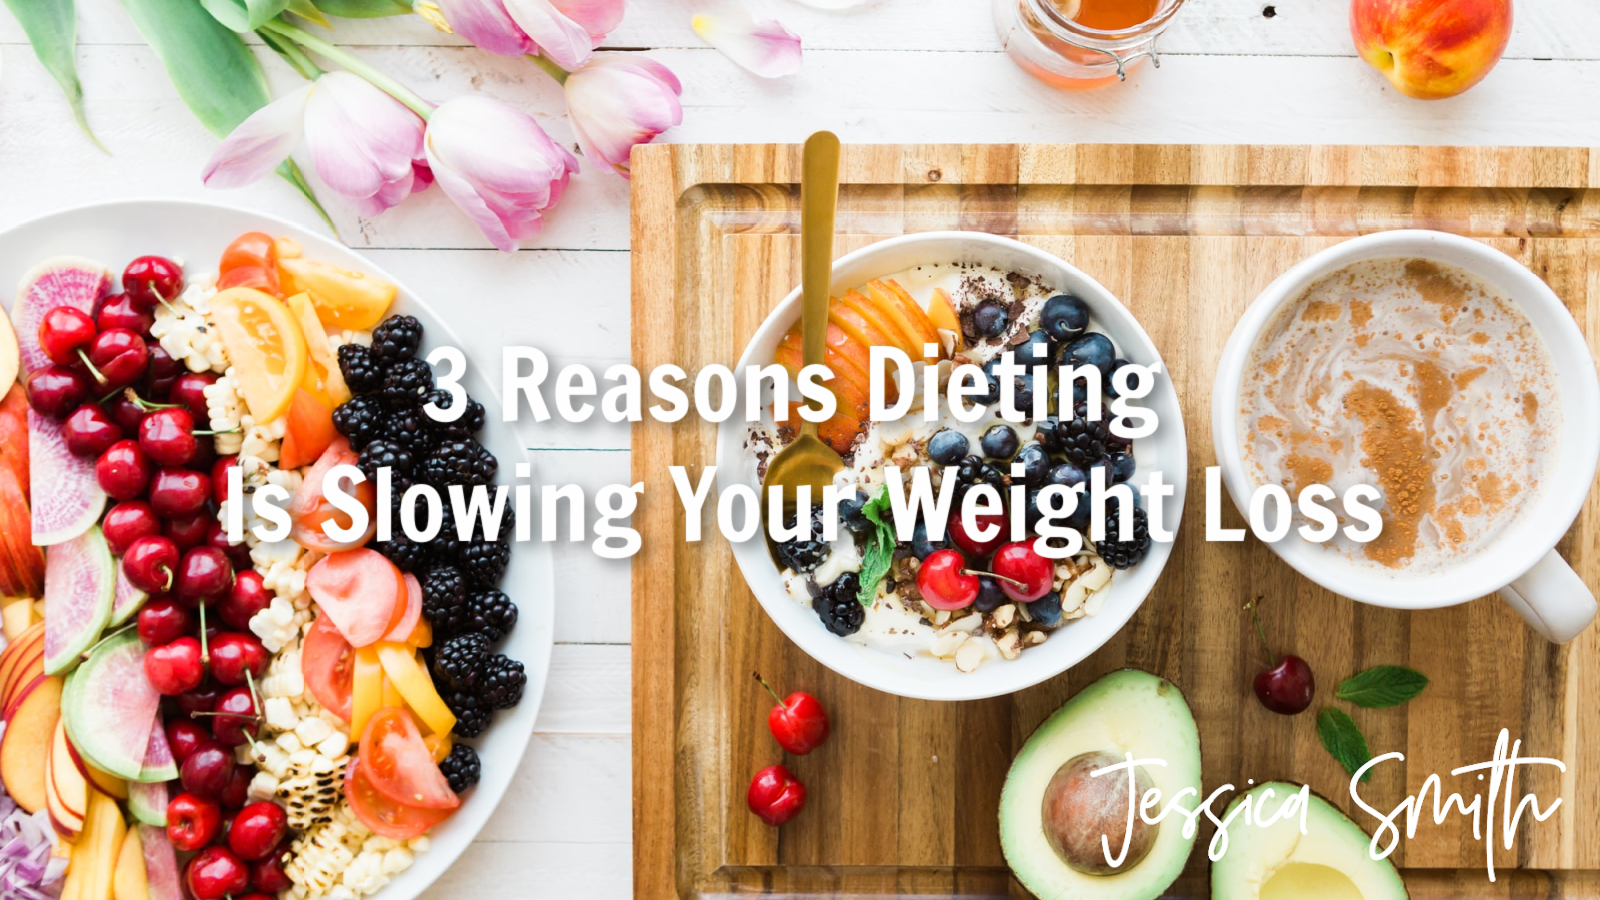 3 Reasons Dieting is Slowing Your Weight Loss